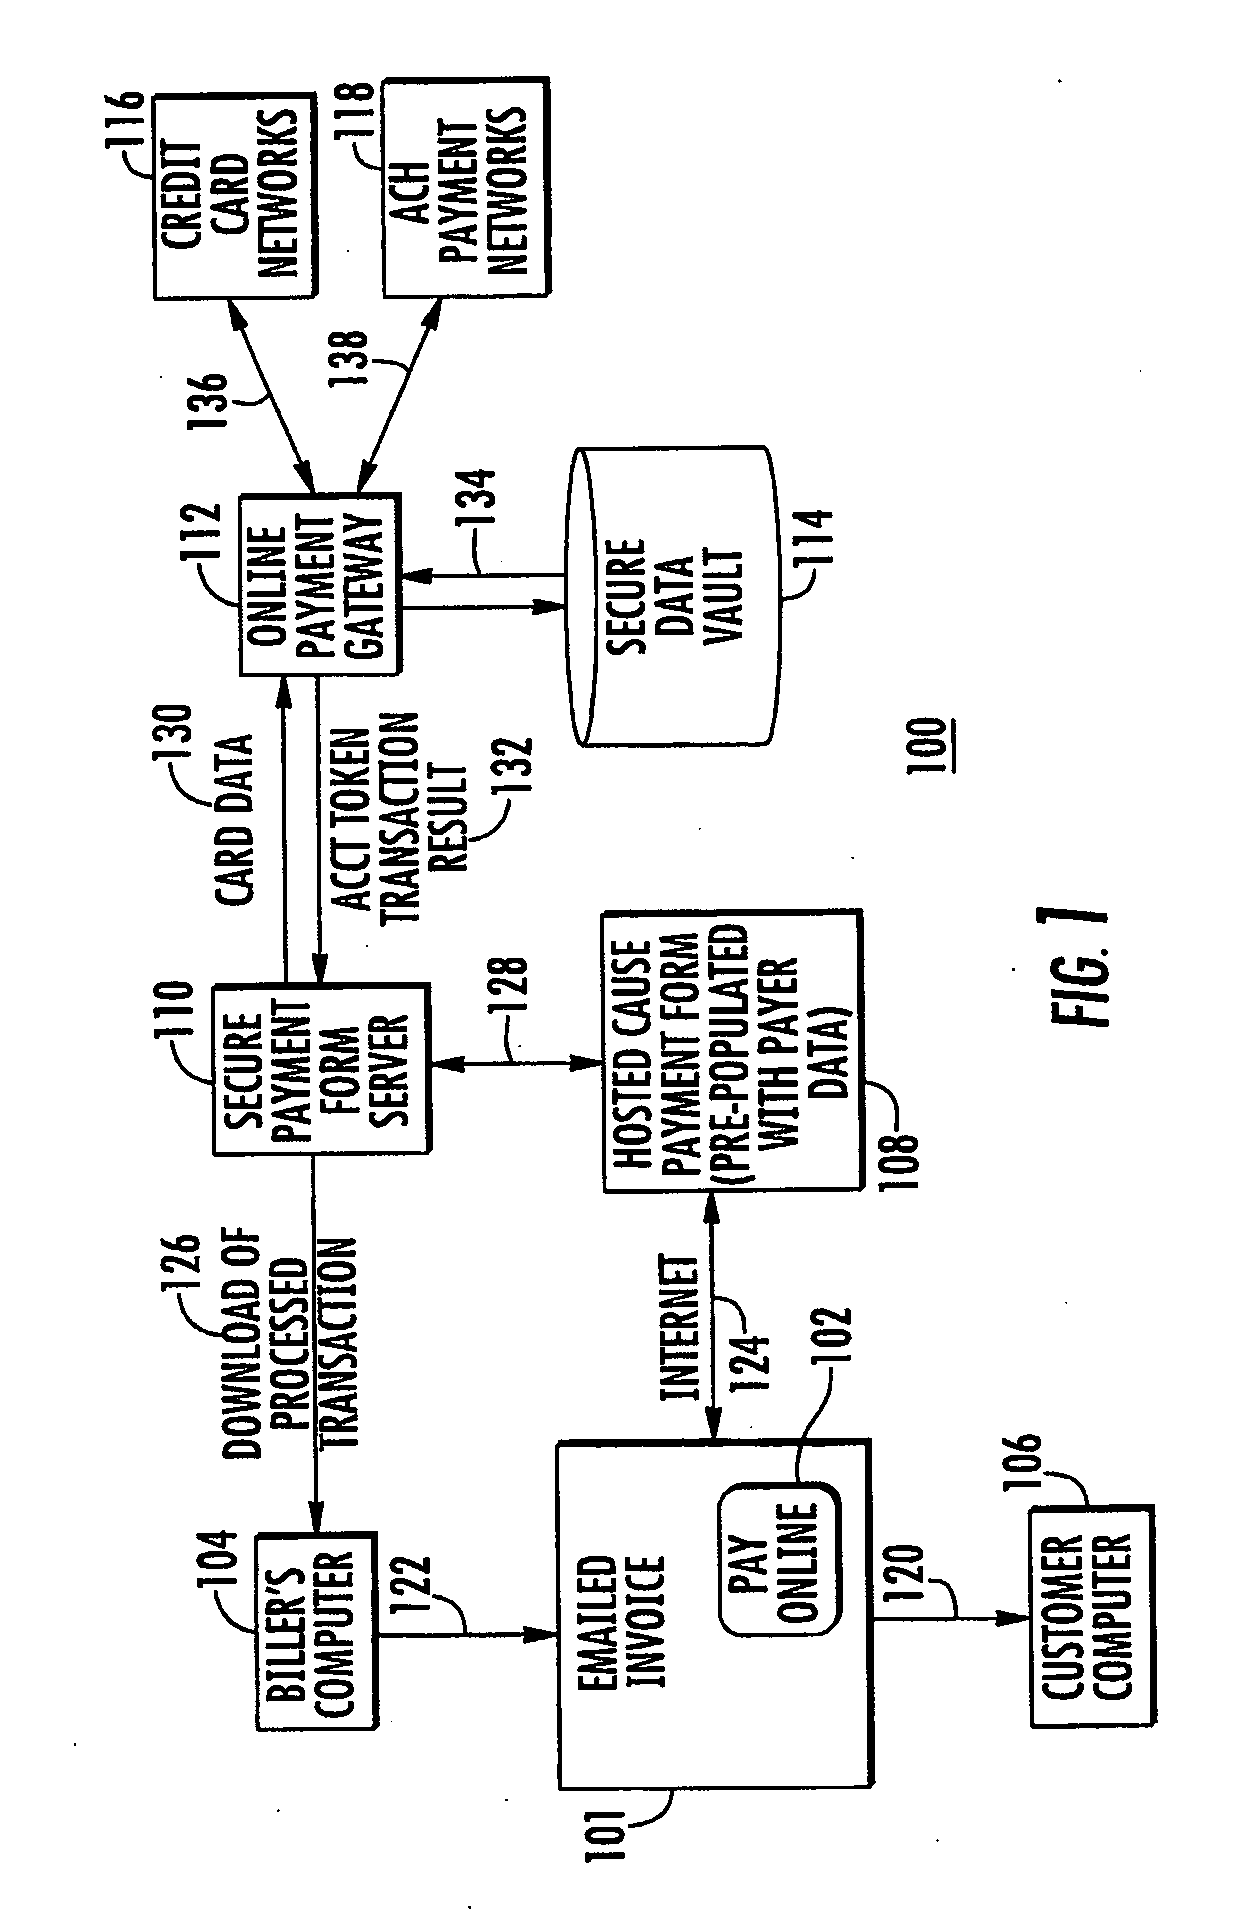 Method and system to process payment